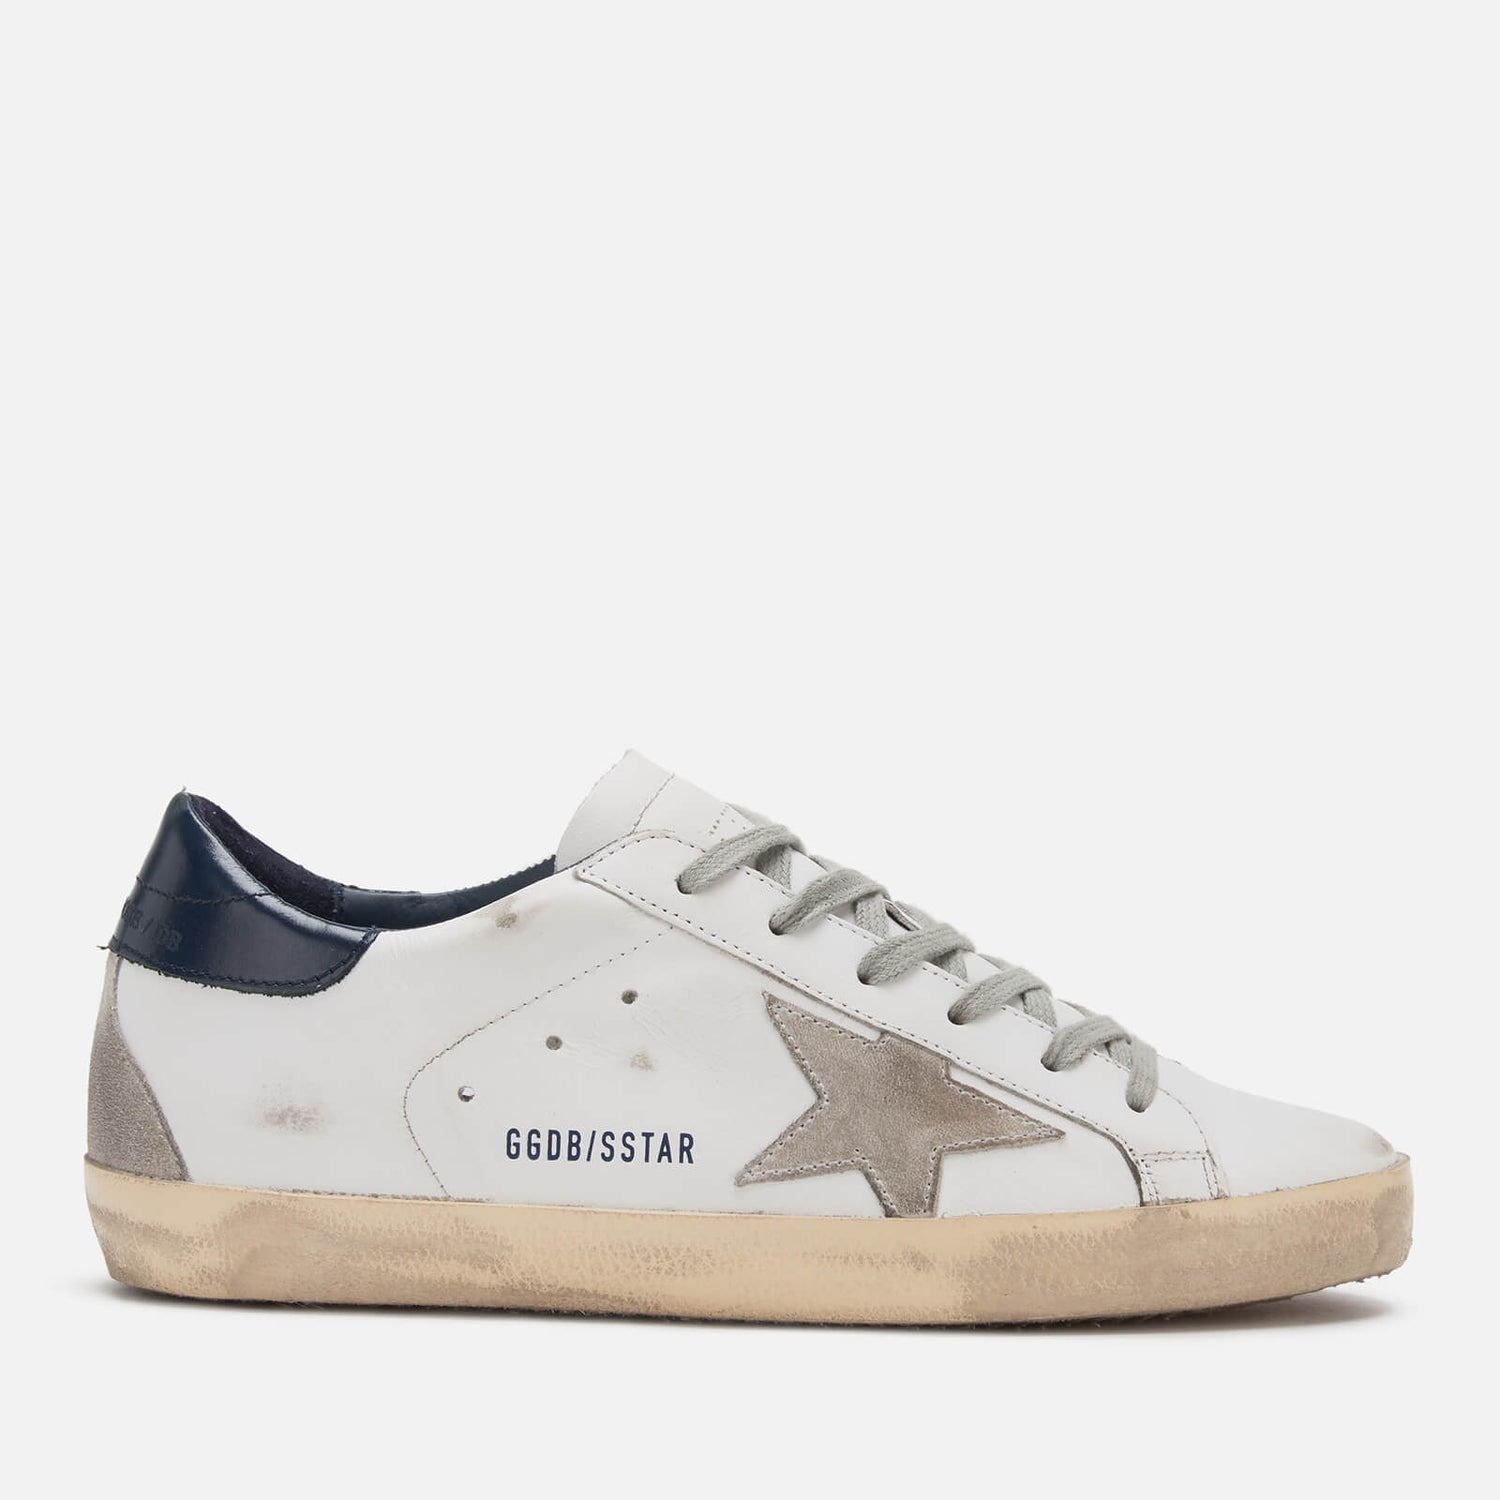 Golden Goose Deluxe Brand Women's Superstar Leather Trainers - White ...